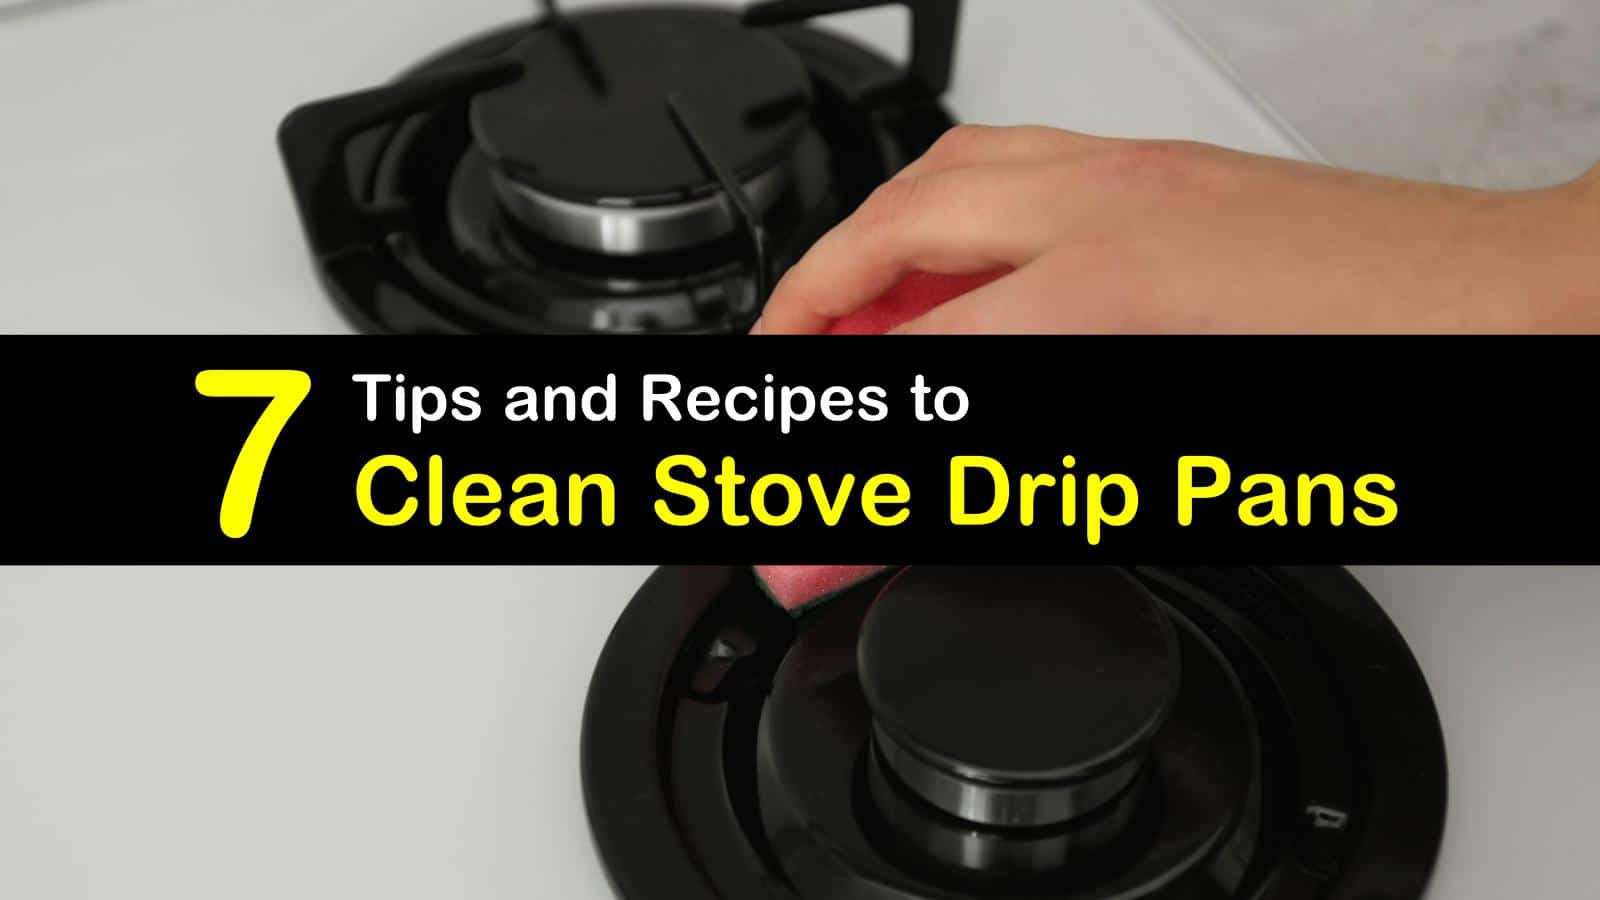 how to clean stove drip pans titleimg1